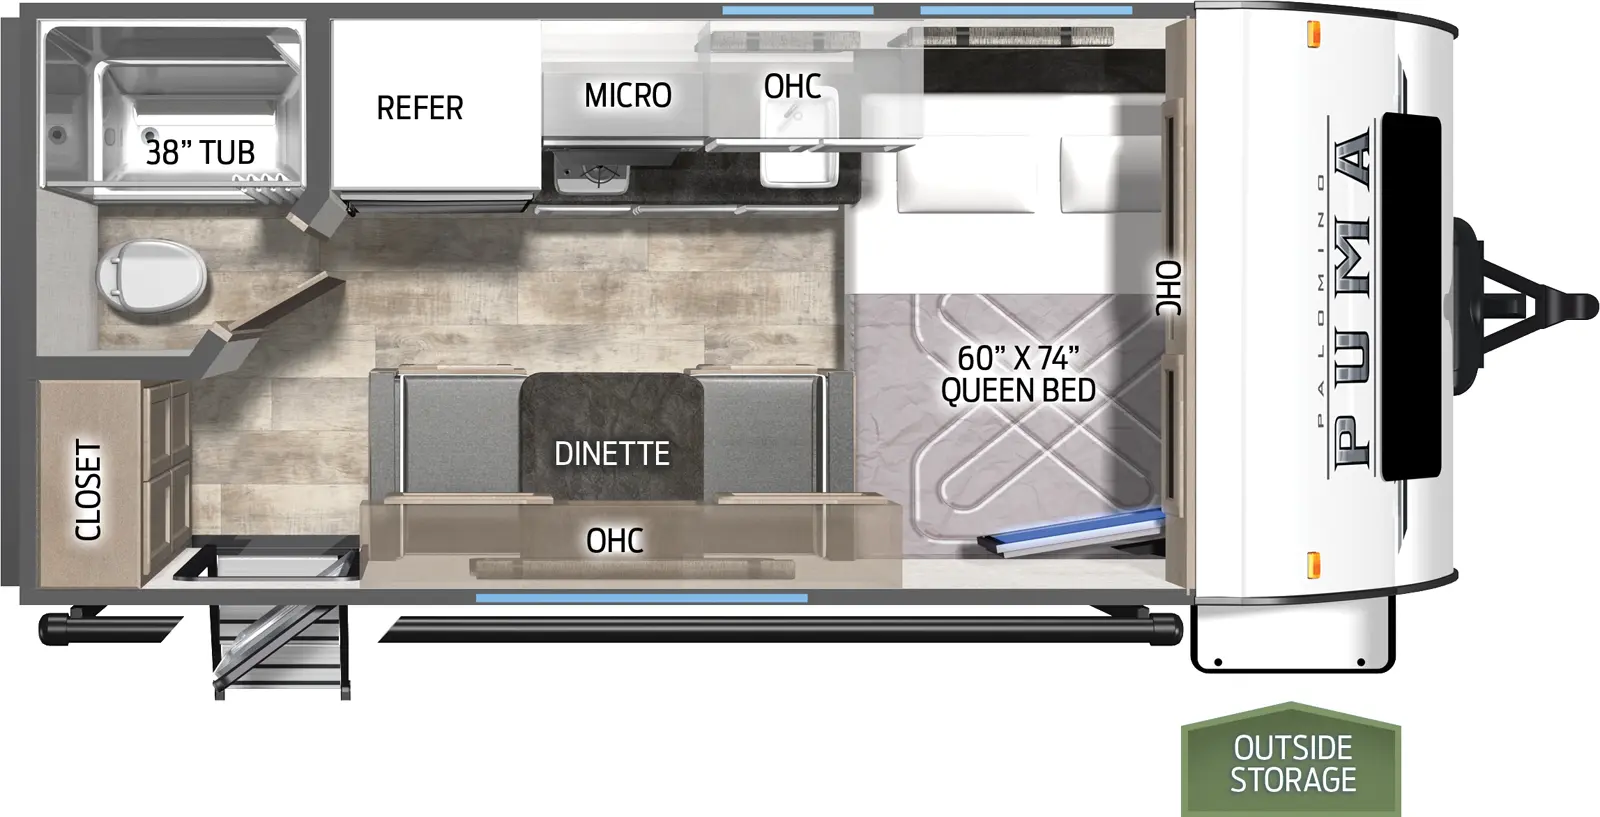 The 12FBX has no slide outs. Exterior features include a 10 foot awning. Interior layout from the front to back: queen bed with end table; booth dinette; kitchen with cooktop and refrigerator; full bathroom; closet.
